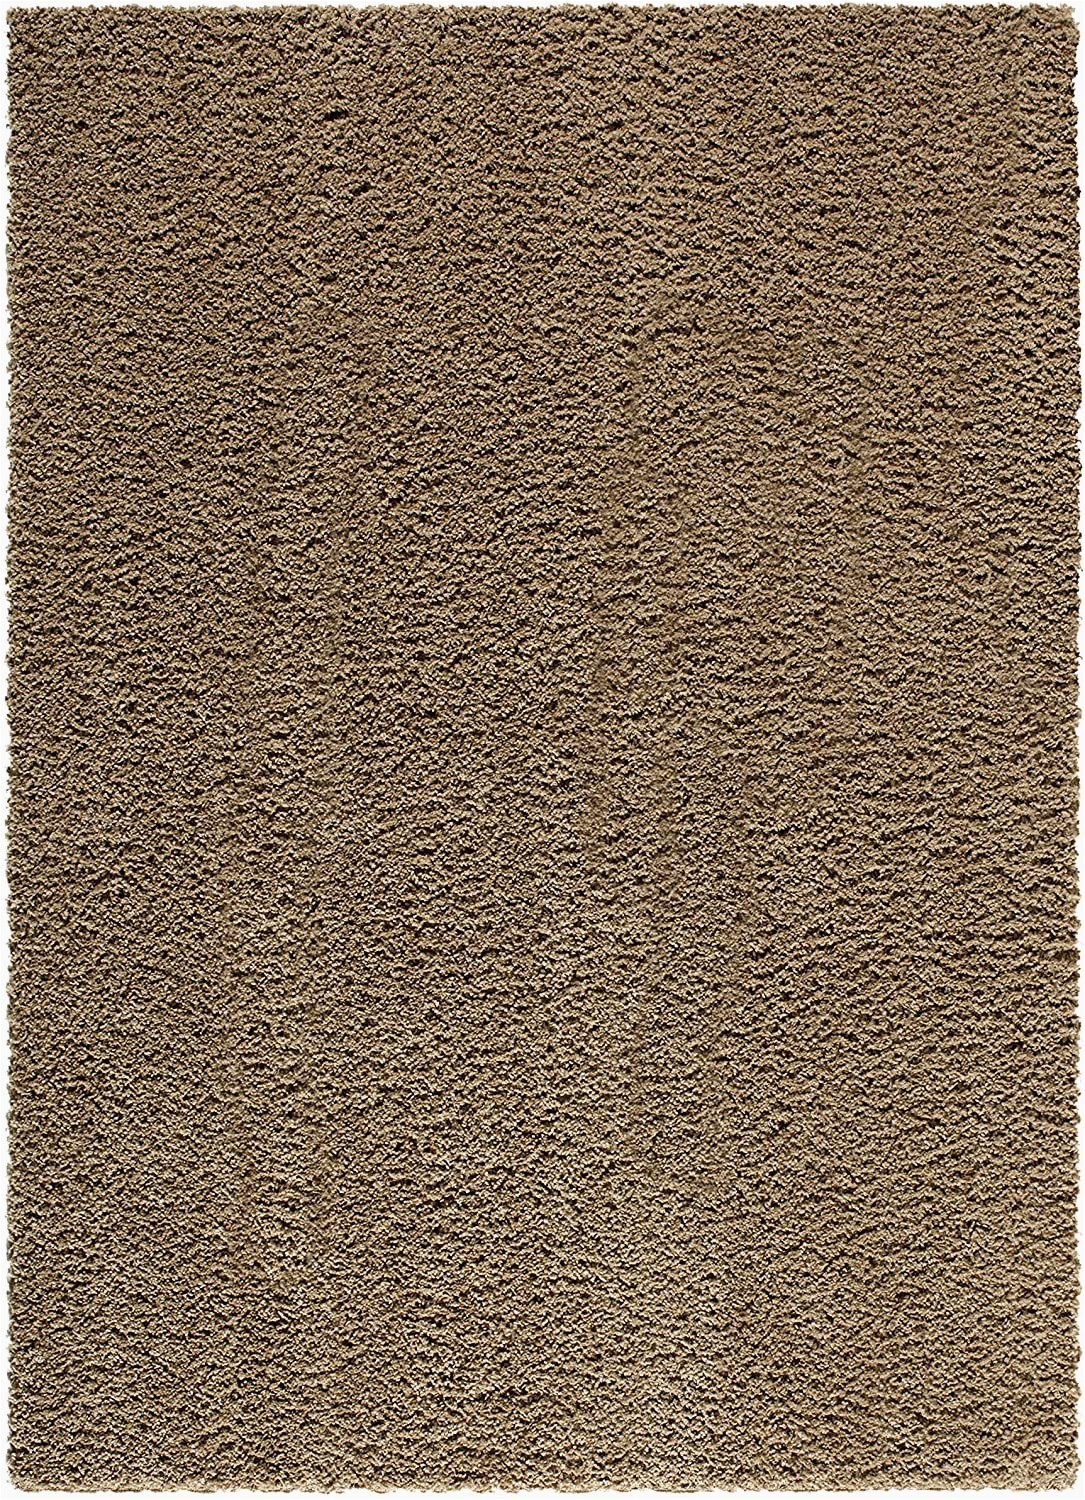 5×7 Non Slip area Rug area Rugs Maples Rugs [made In Usa][catriona] 5 X 7 Non Slip Padded Rug for Living Room Bedroom and Dining Room Maverick Brown